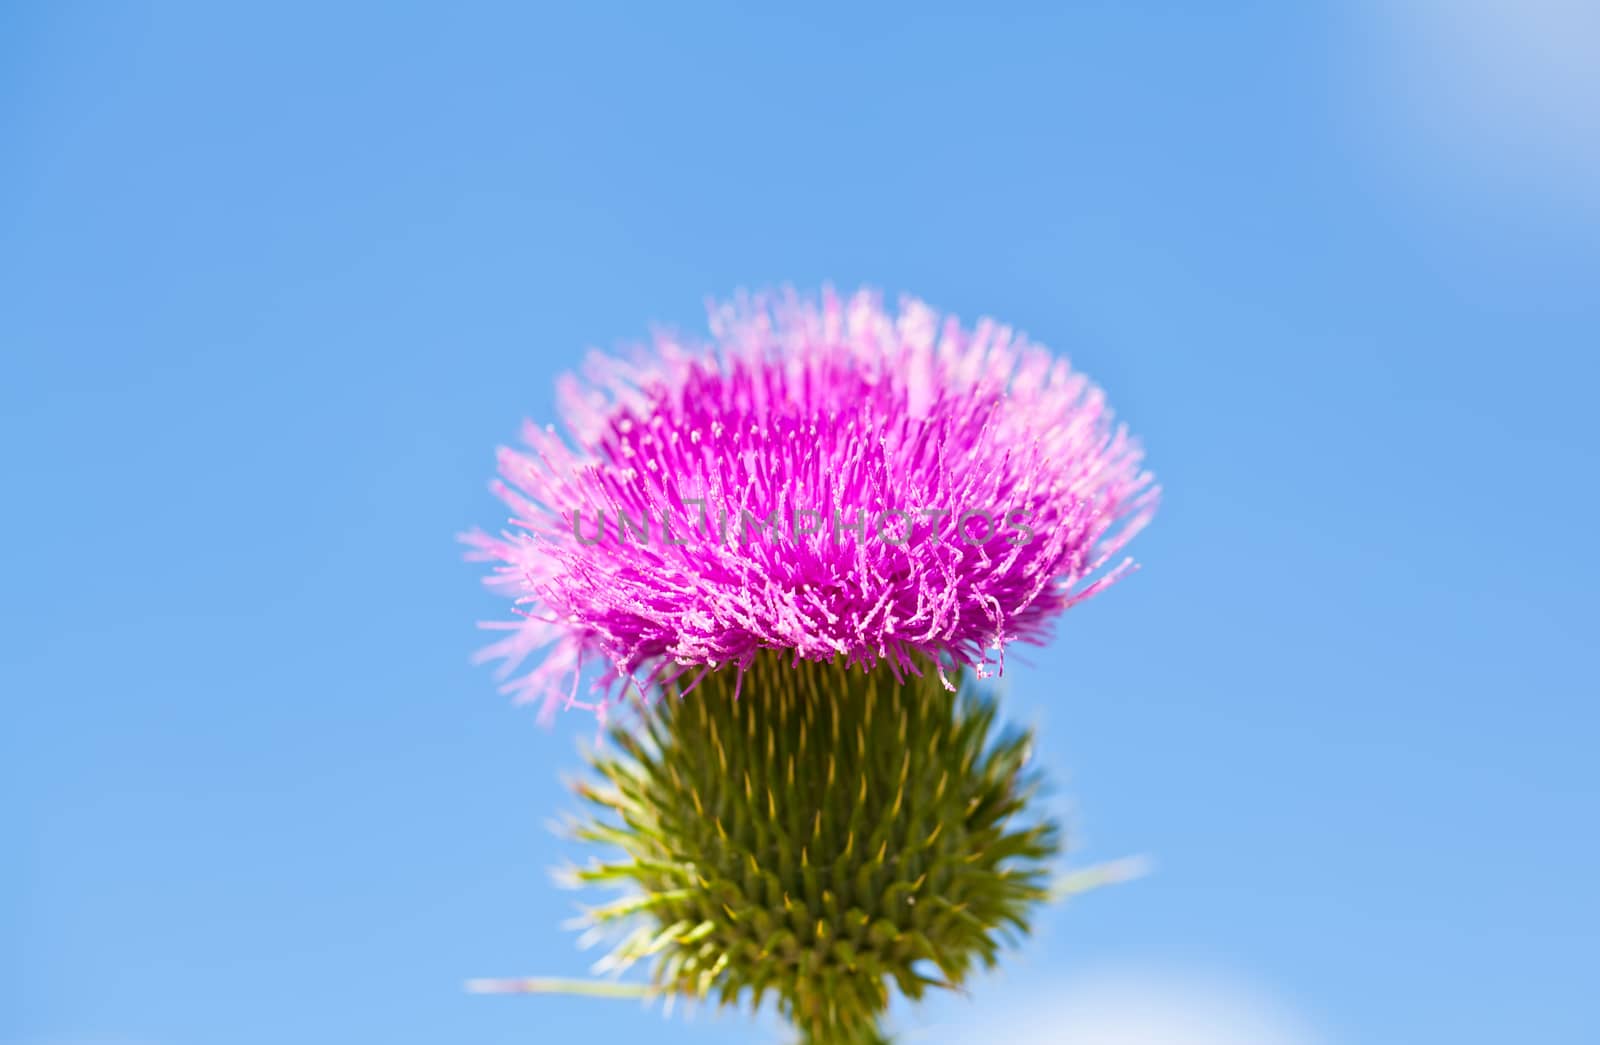 Wild thistle with pink flower on blue sky background